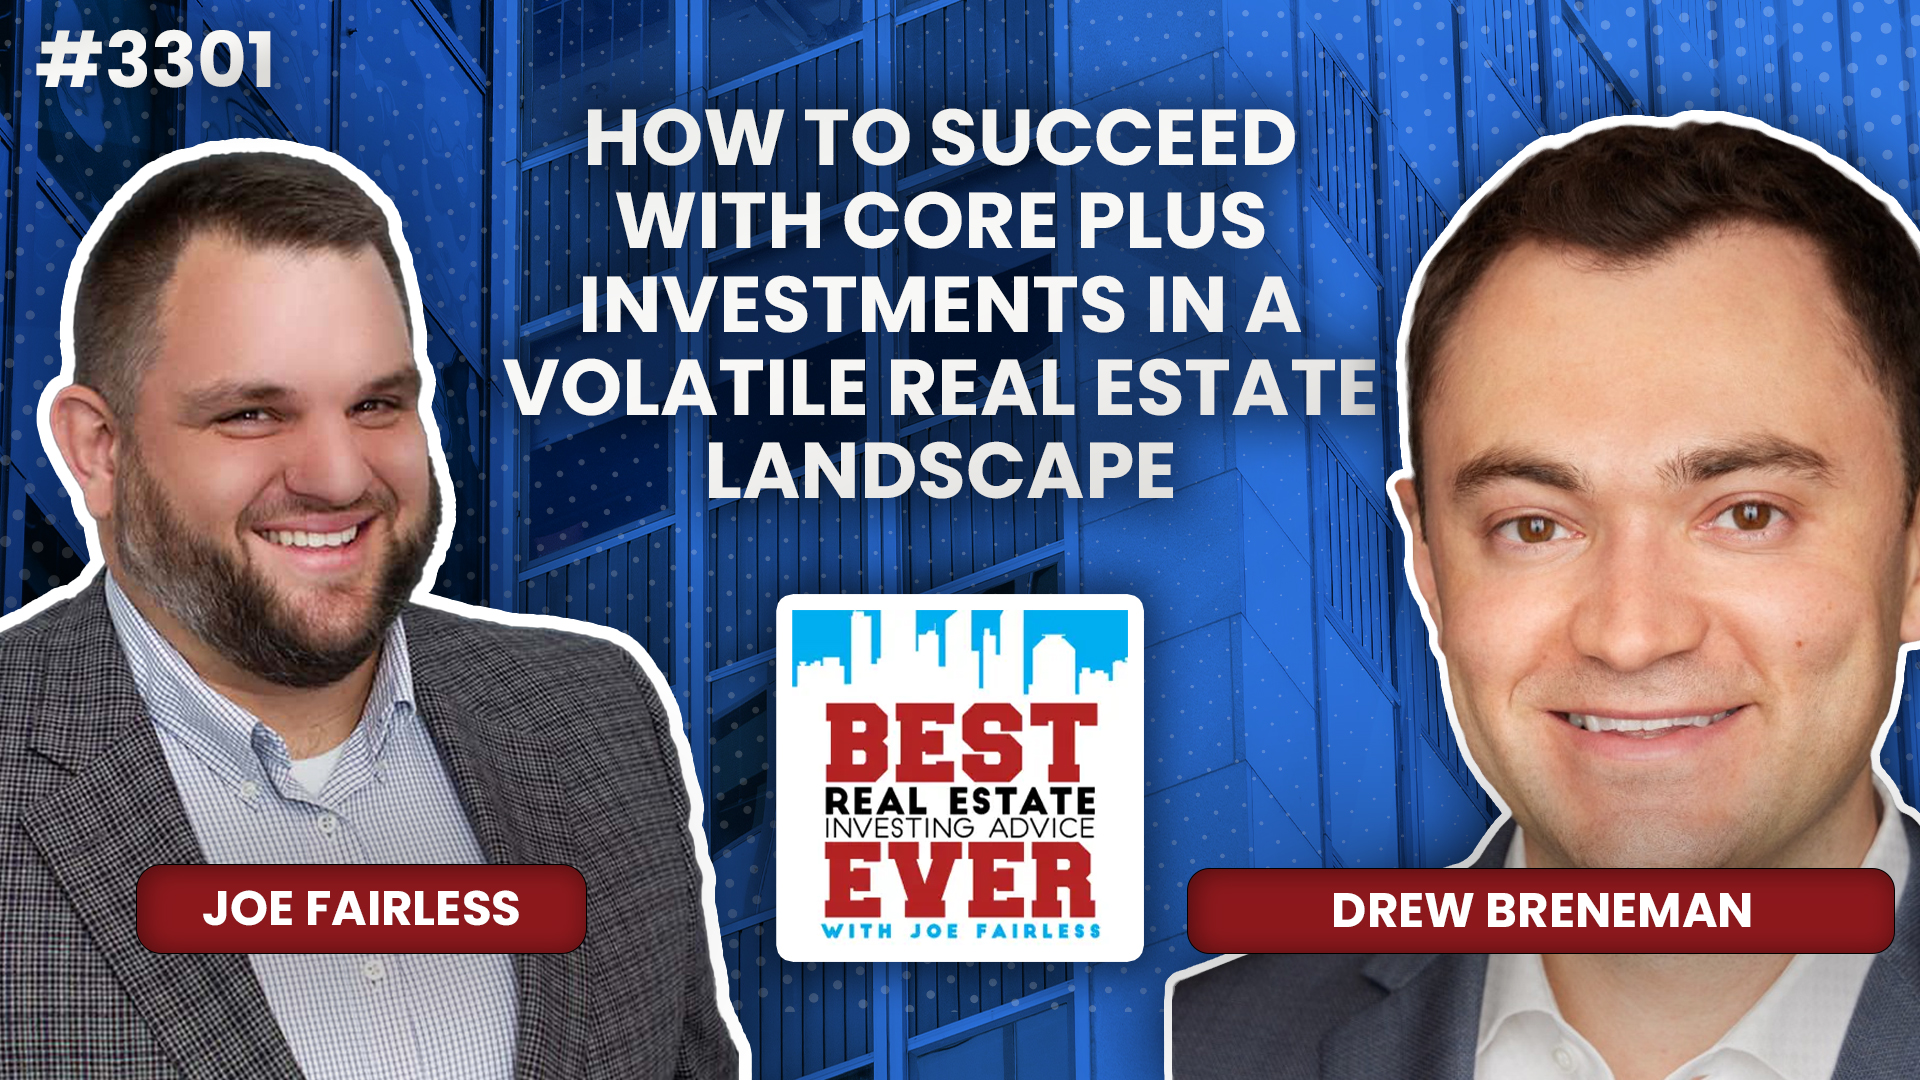 JF3301: Drew Breneman - How to Succeed with Core Plus Investments in a Volatile Real Estate Landscape